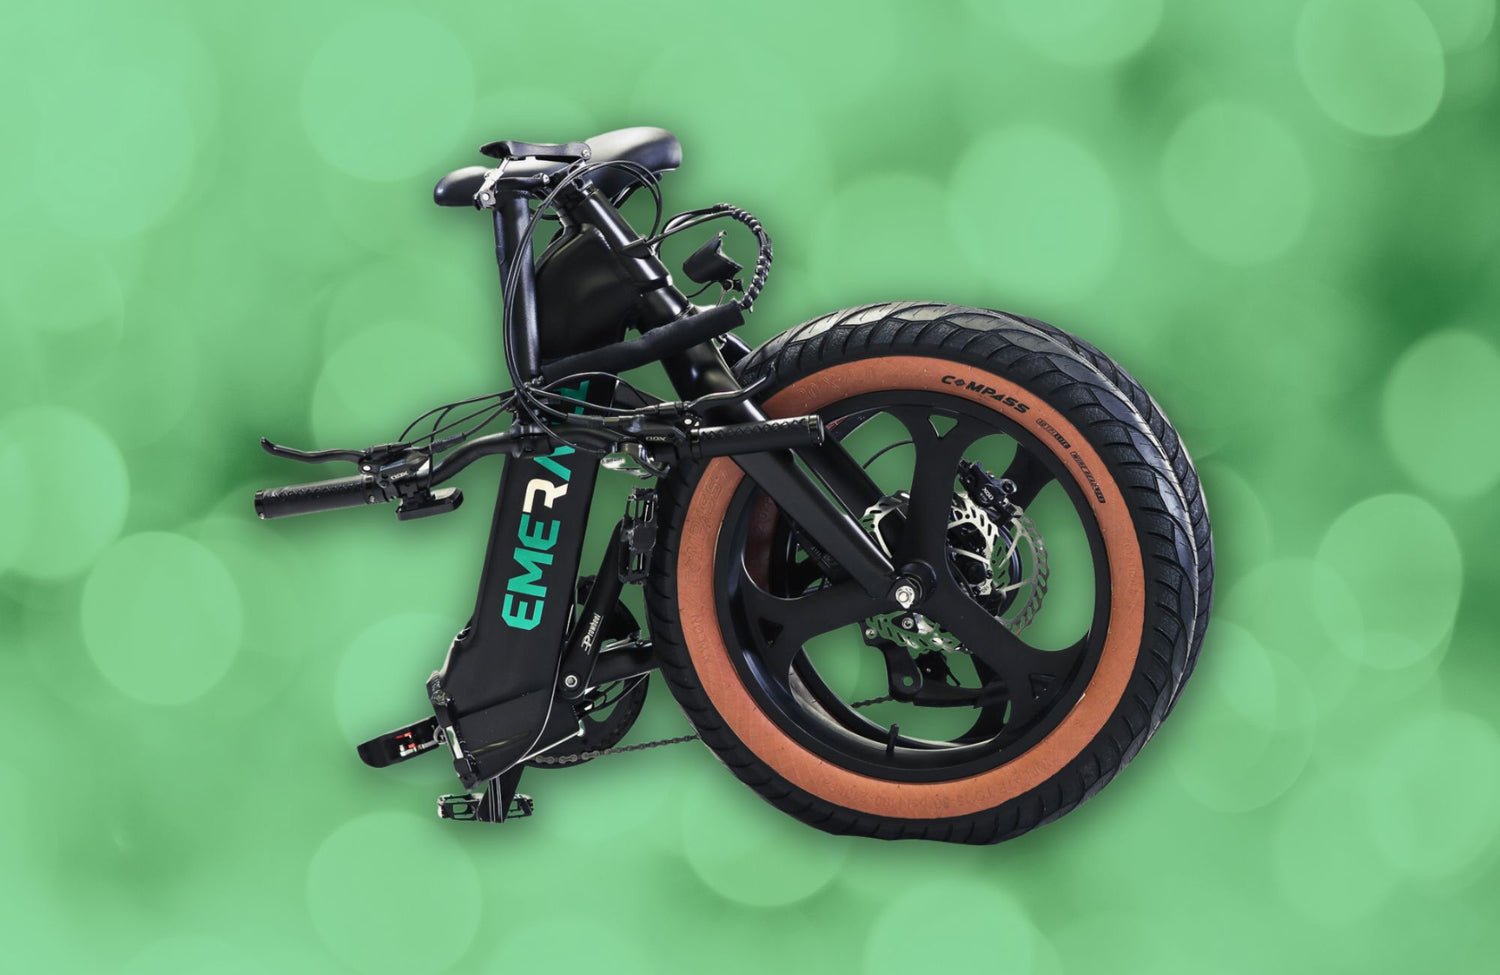 The Advantages of Folding Ebikes: Convenience, Portability, and More